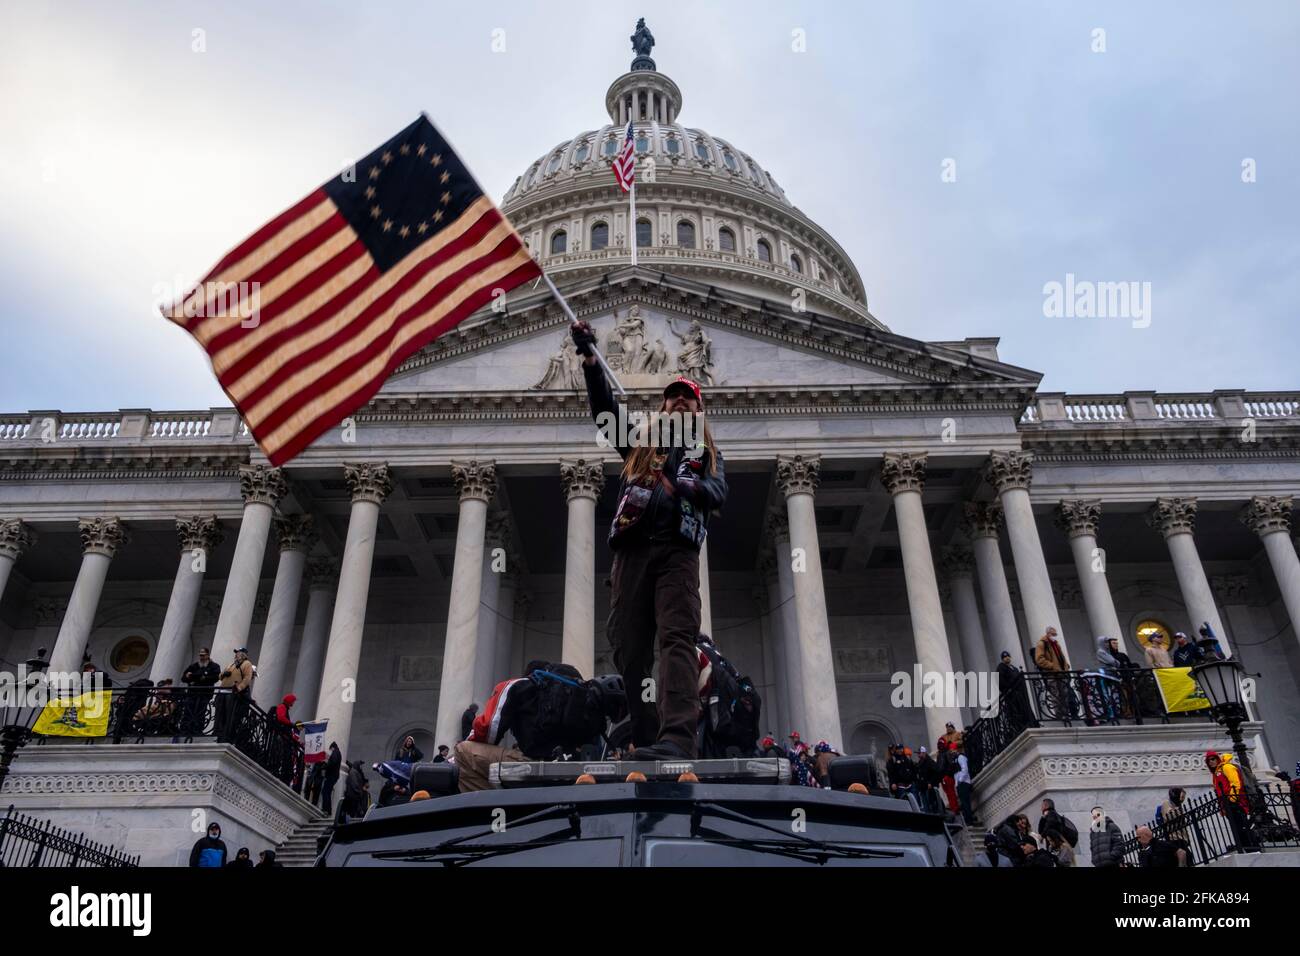 Washington DC, USA. 6th Jan, 2021. A man waves a flag in front of the Capitol Building during the storming of the building by Trump supporters. Stock Photo